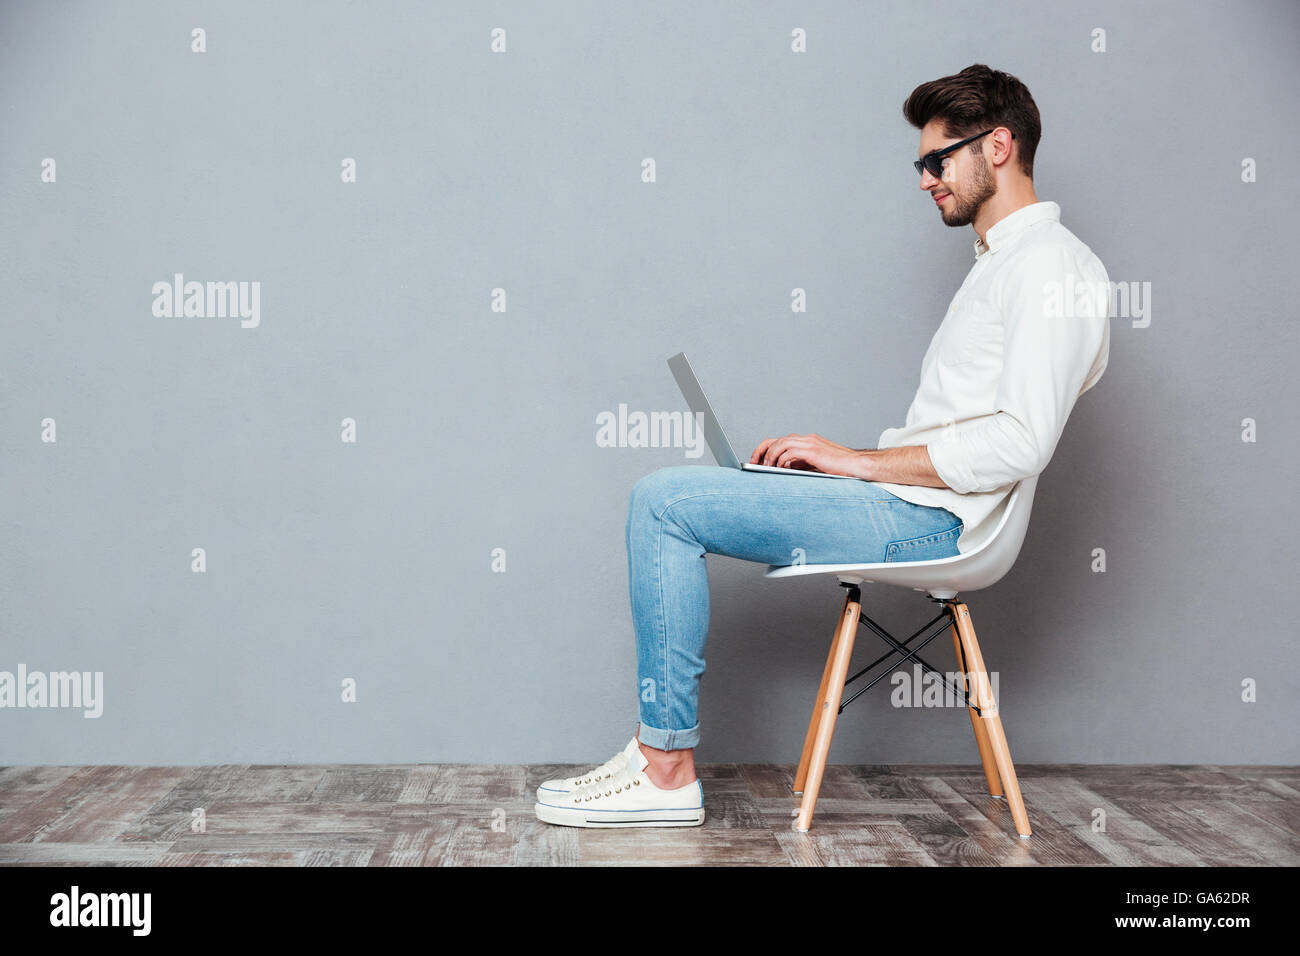 Profile of serious young man in sunglasses sitting on chair and using laptop over grey background Stock Photo